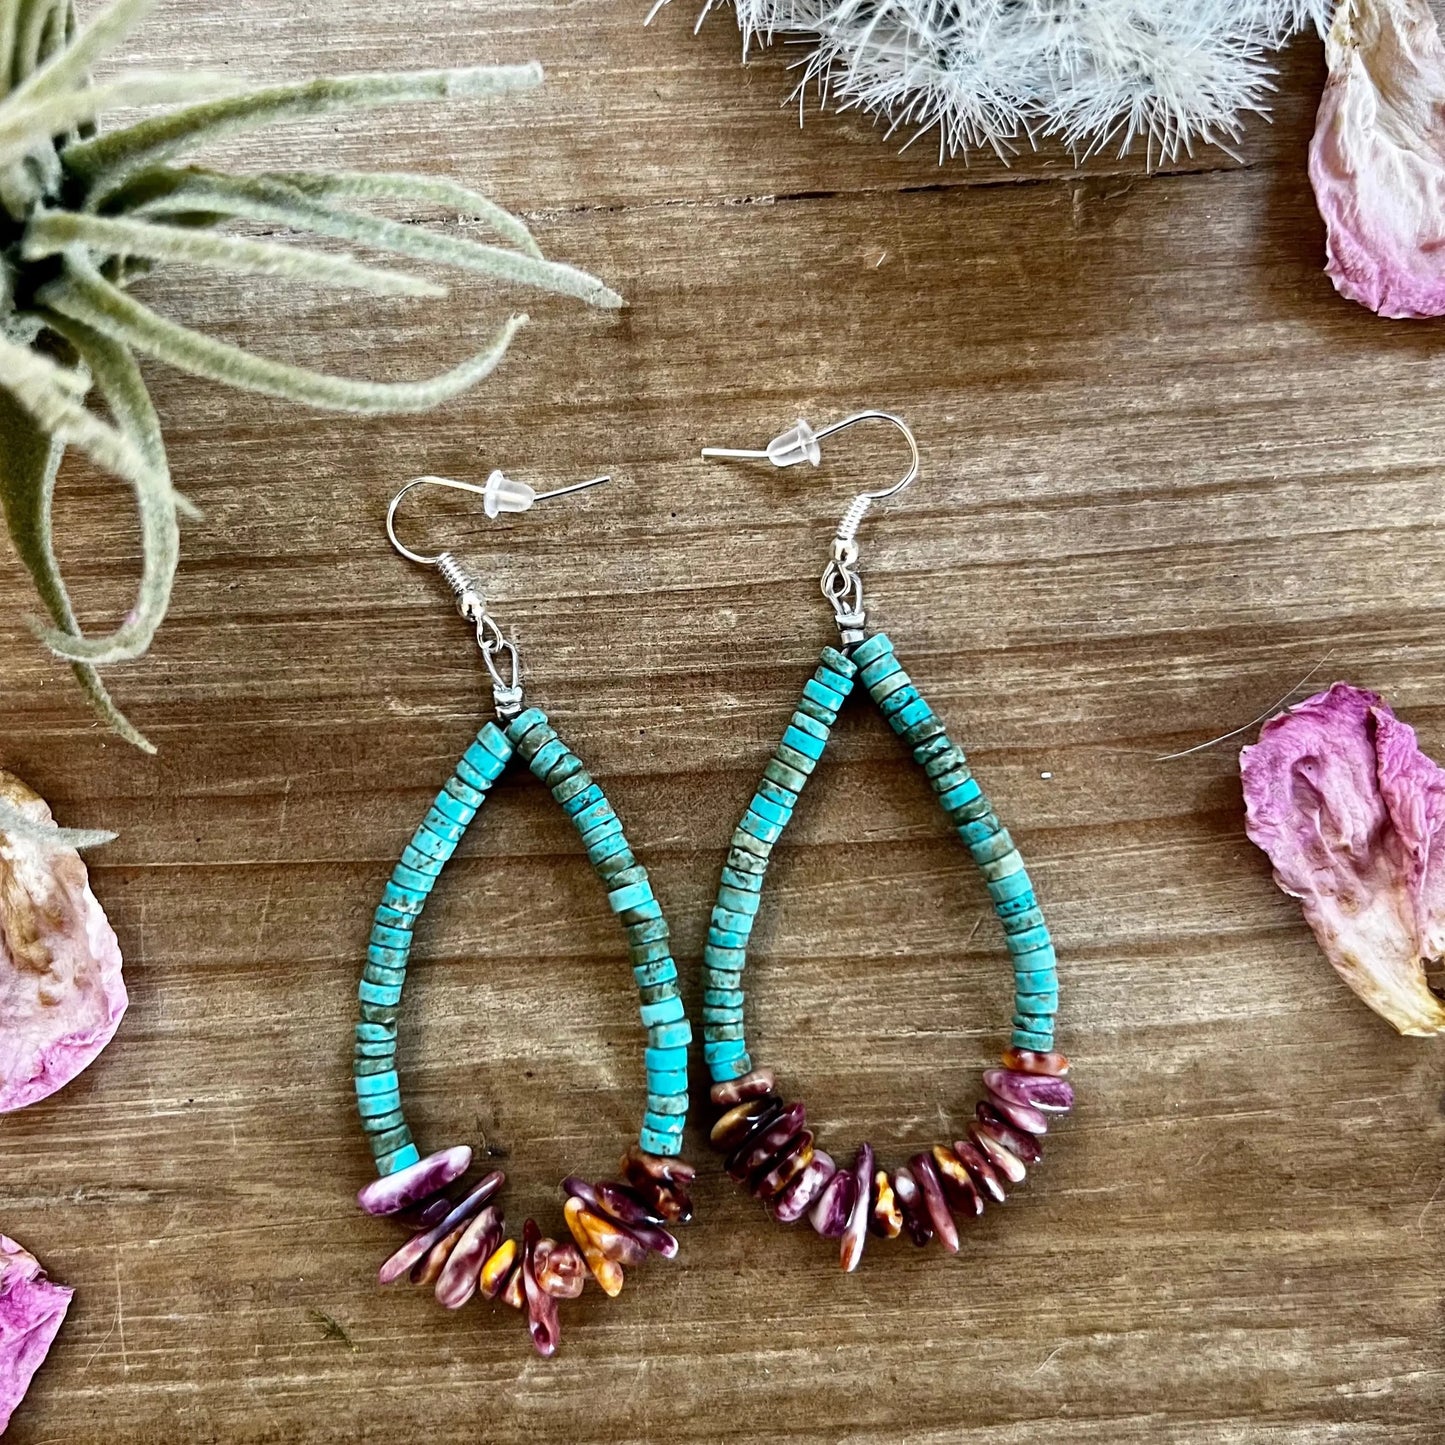 The Austin Authentic Earrings